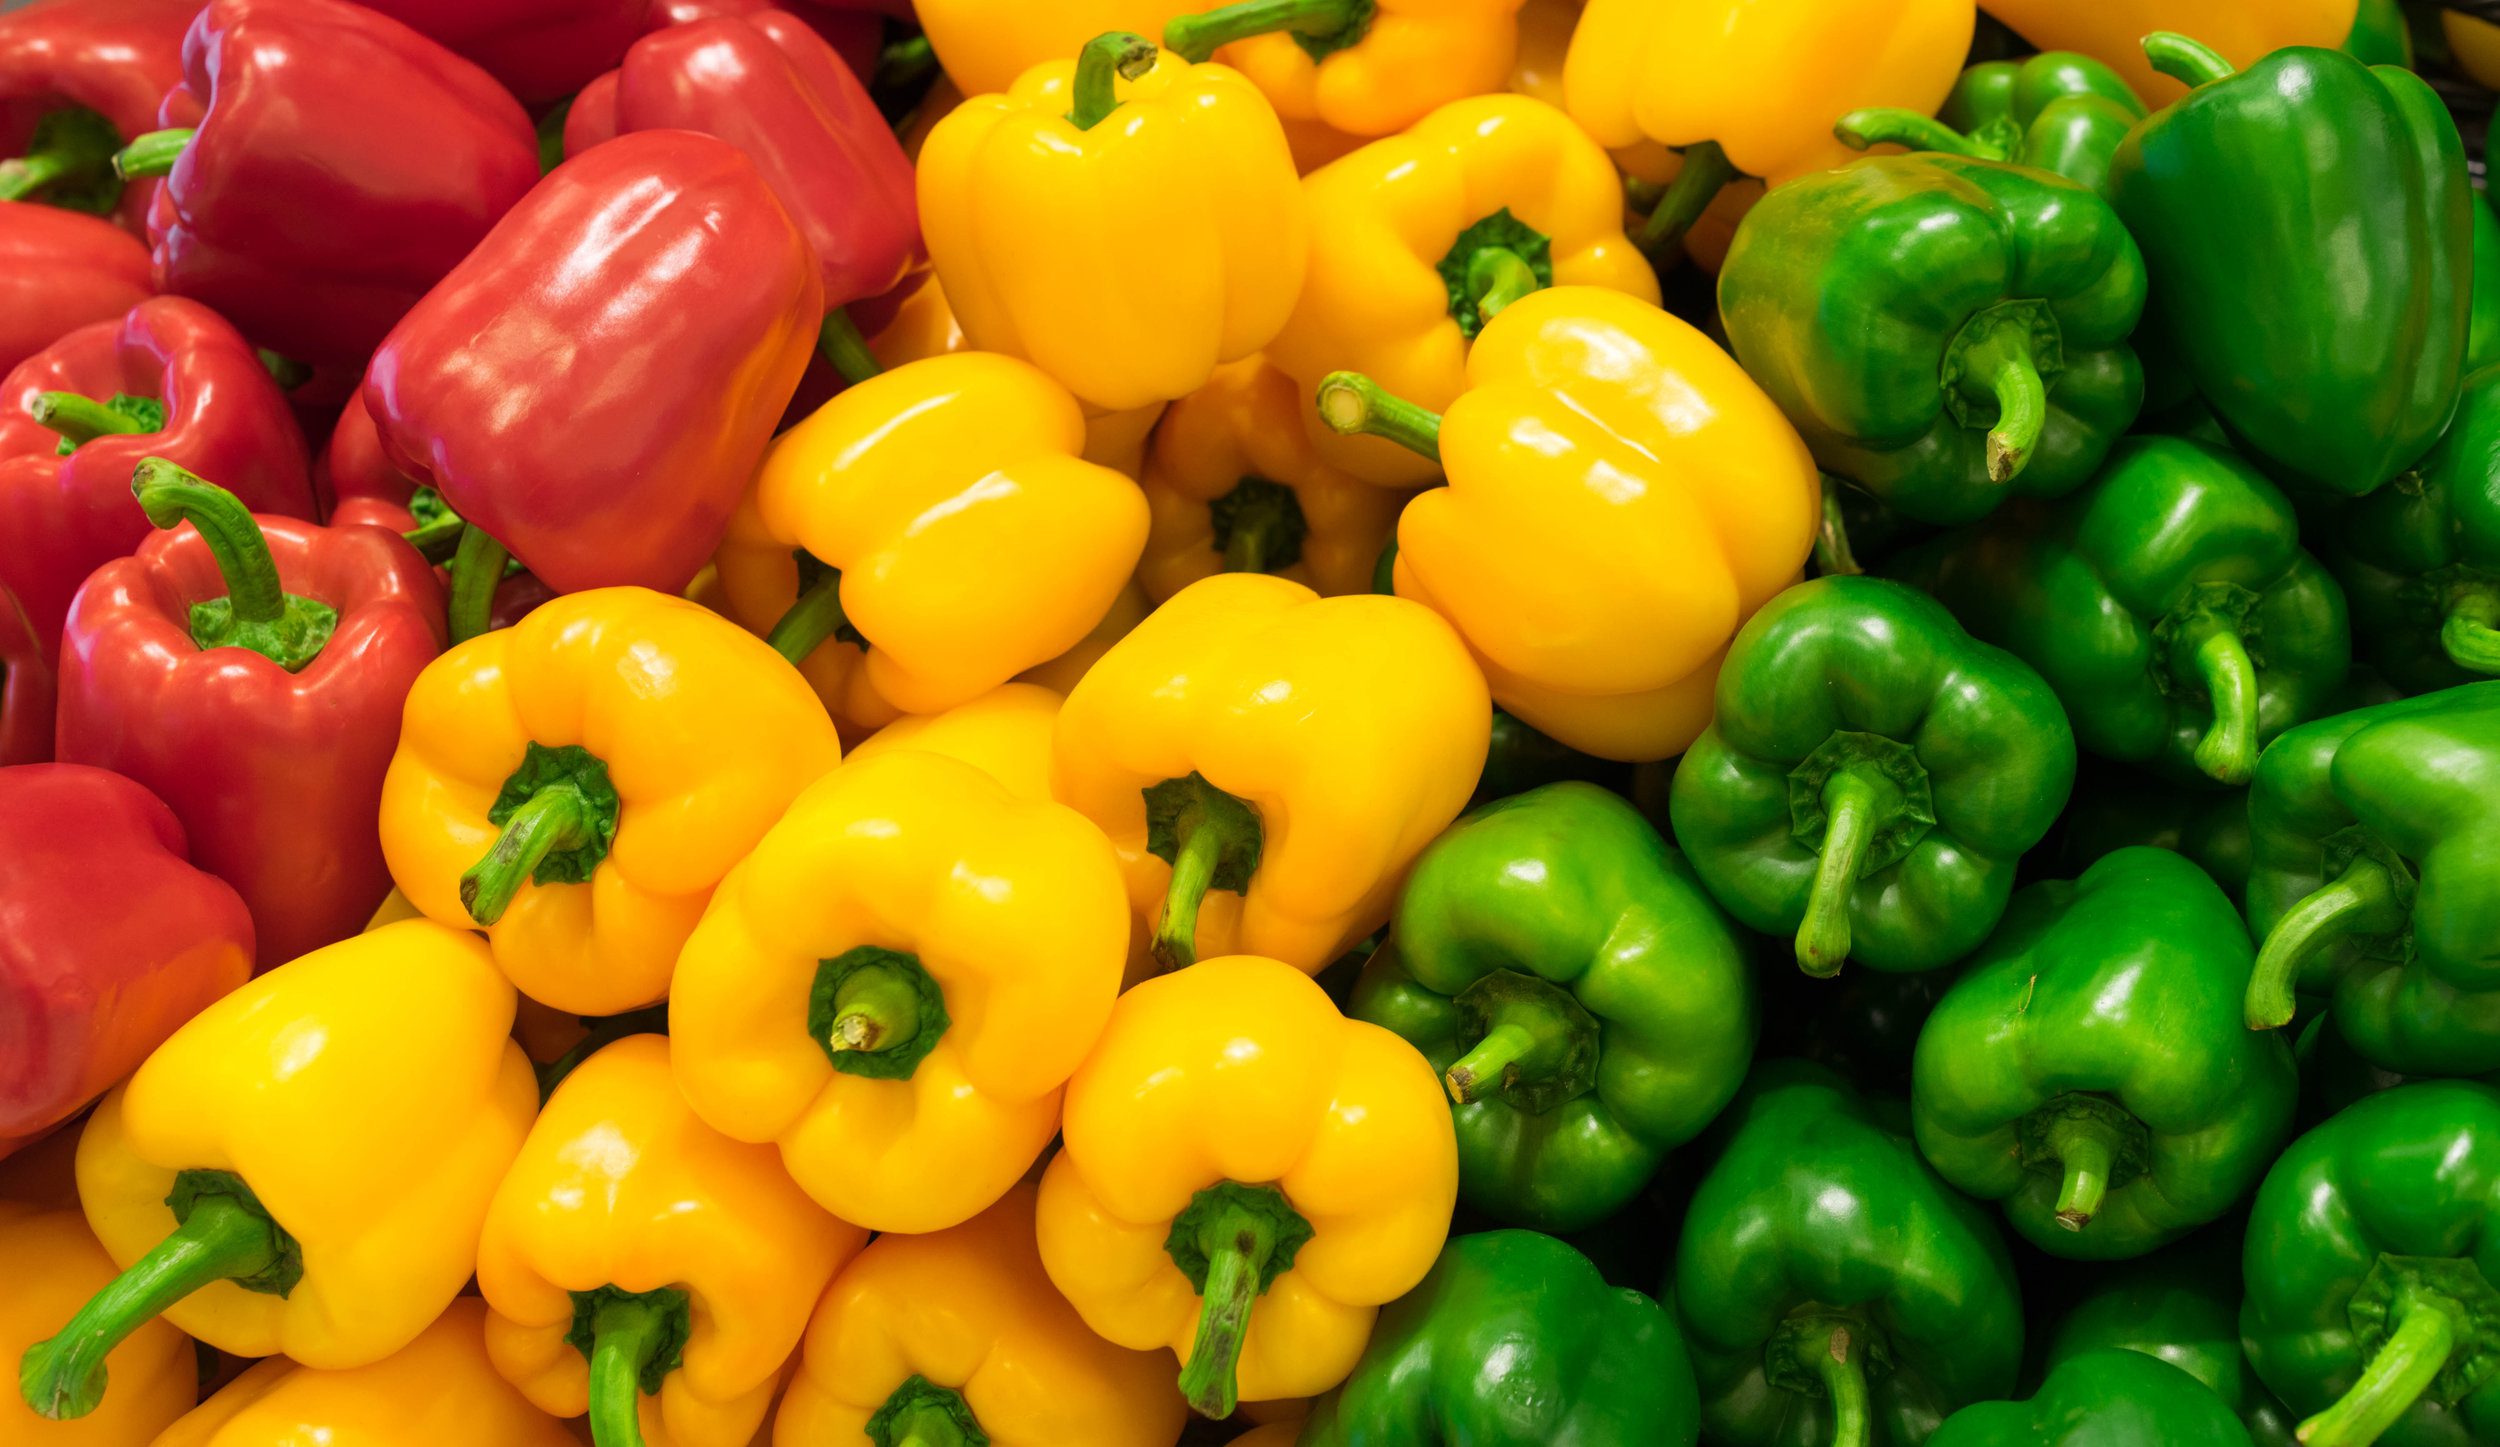 Red, yellow, and green bell peppers (capsicum) background